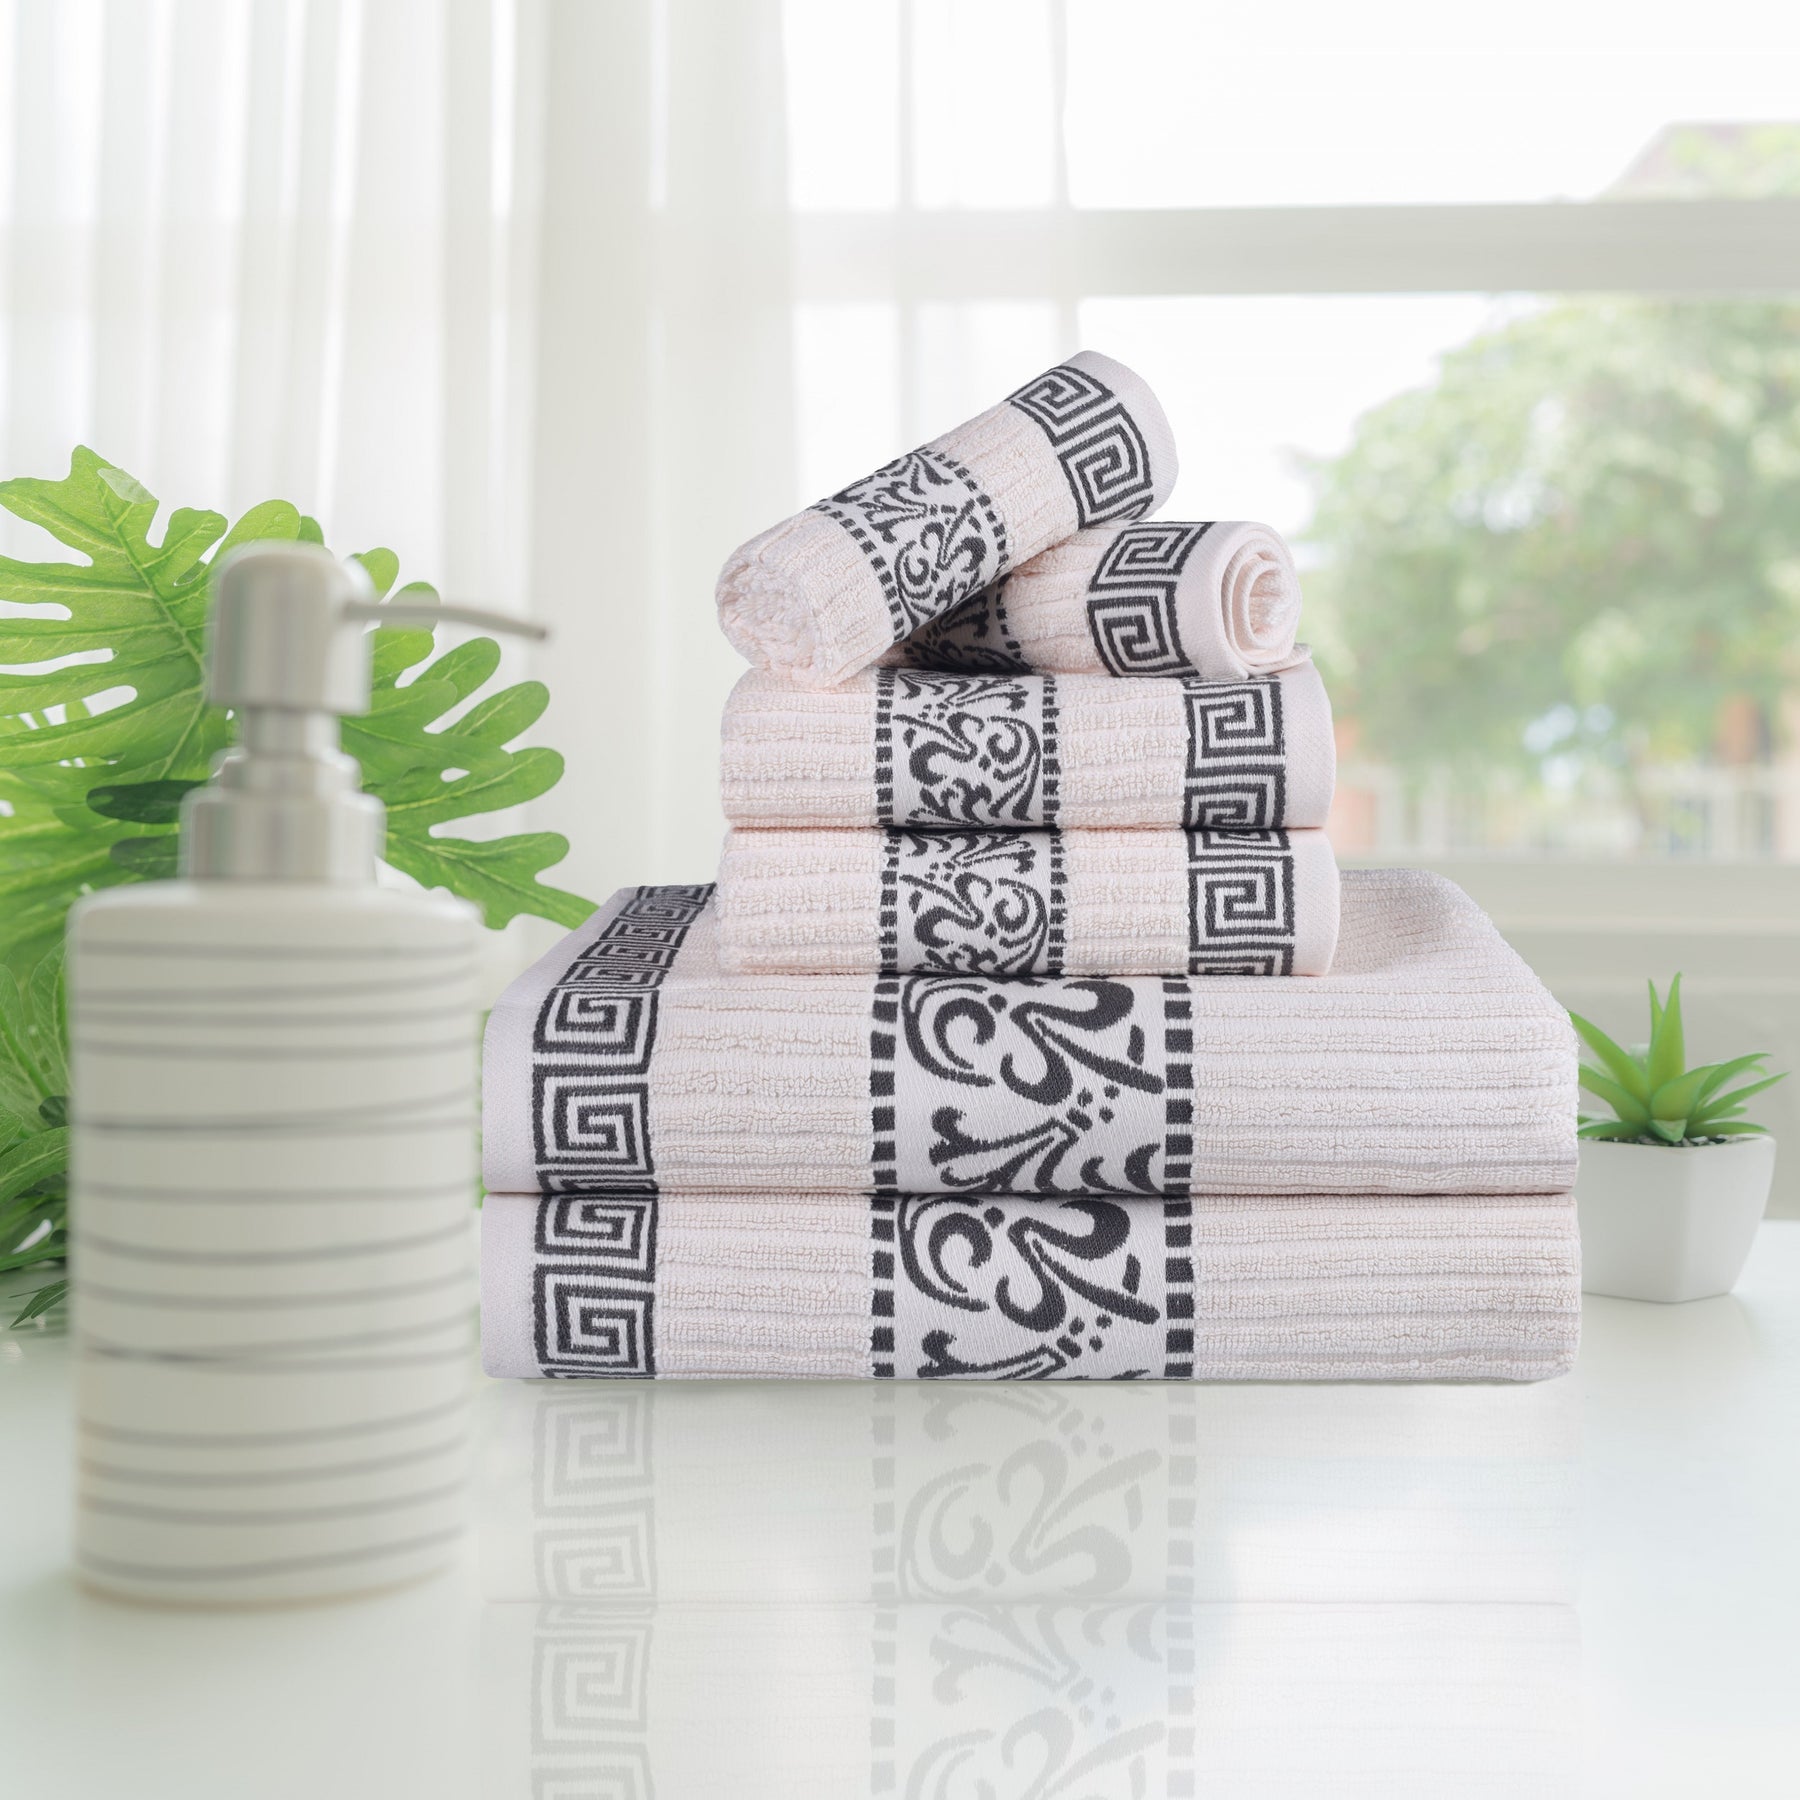 Superior Athens Cotton 6-Piece Assorted Towel Set with Greek Scroll and Floral Pattern - Ivory-Grey